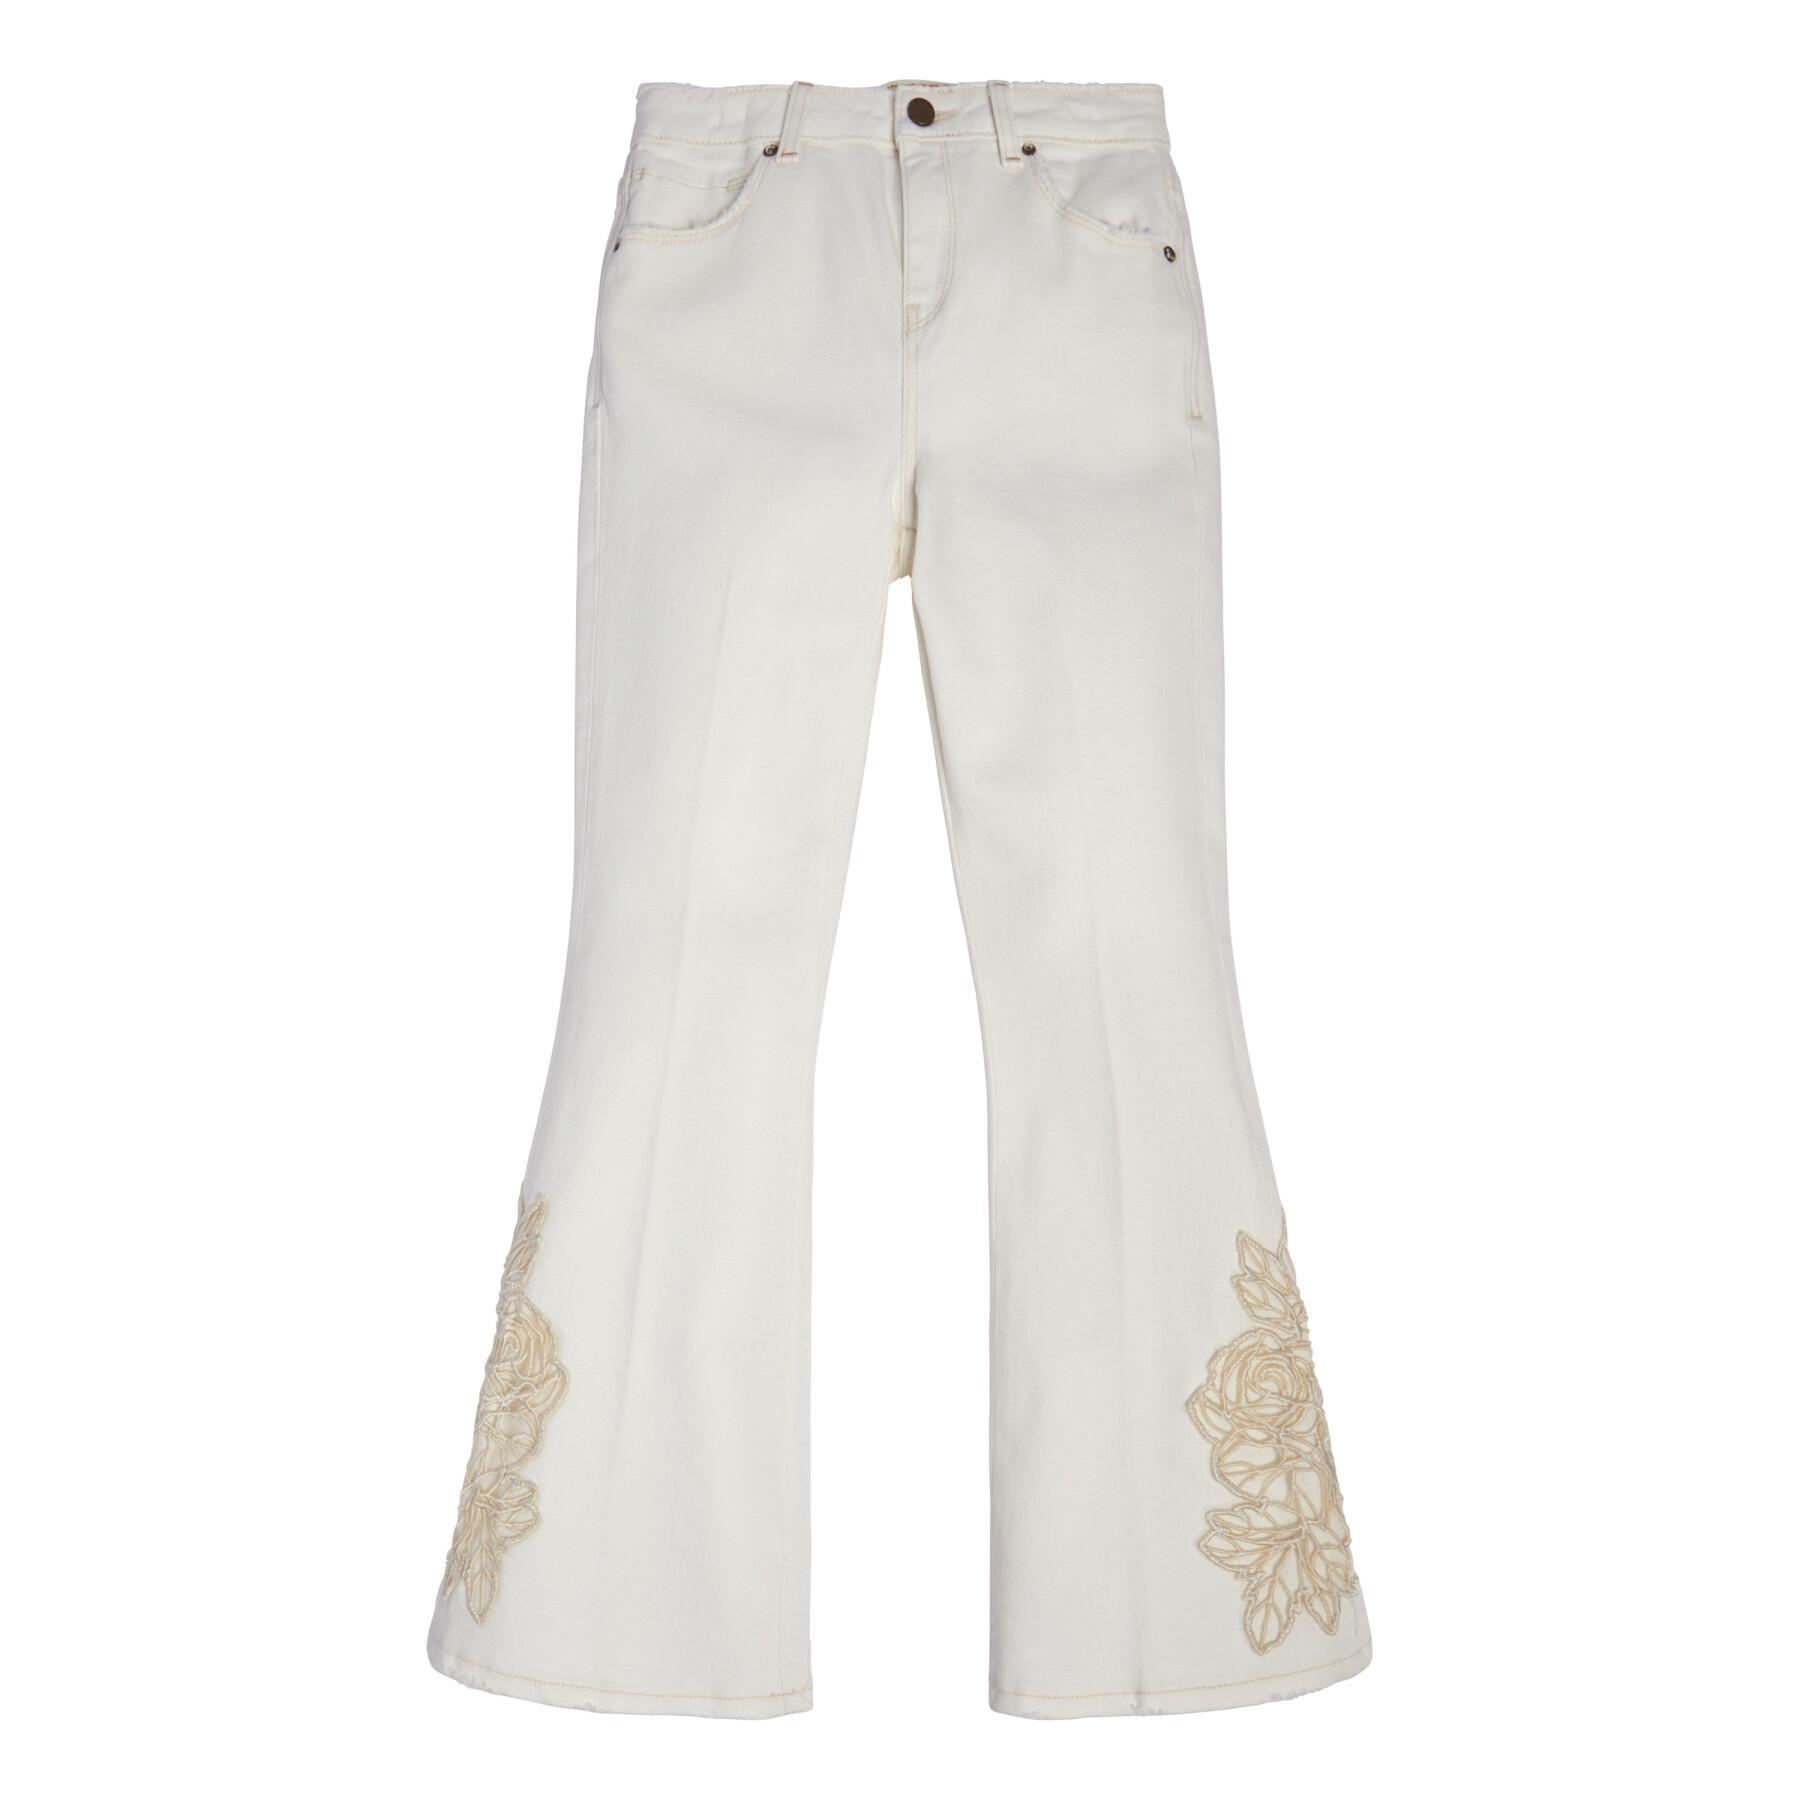 Jeans flare filha Guess Flare